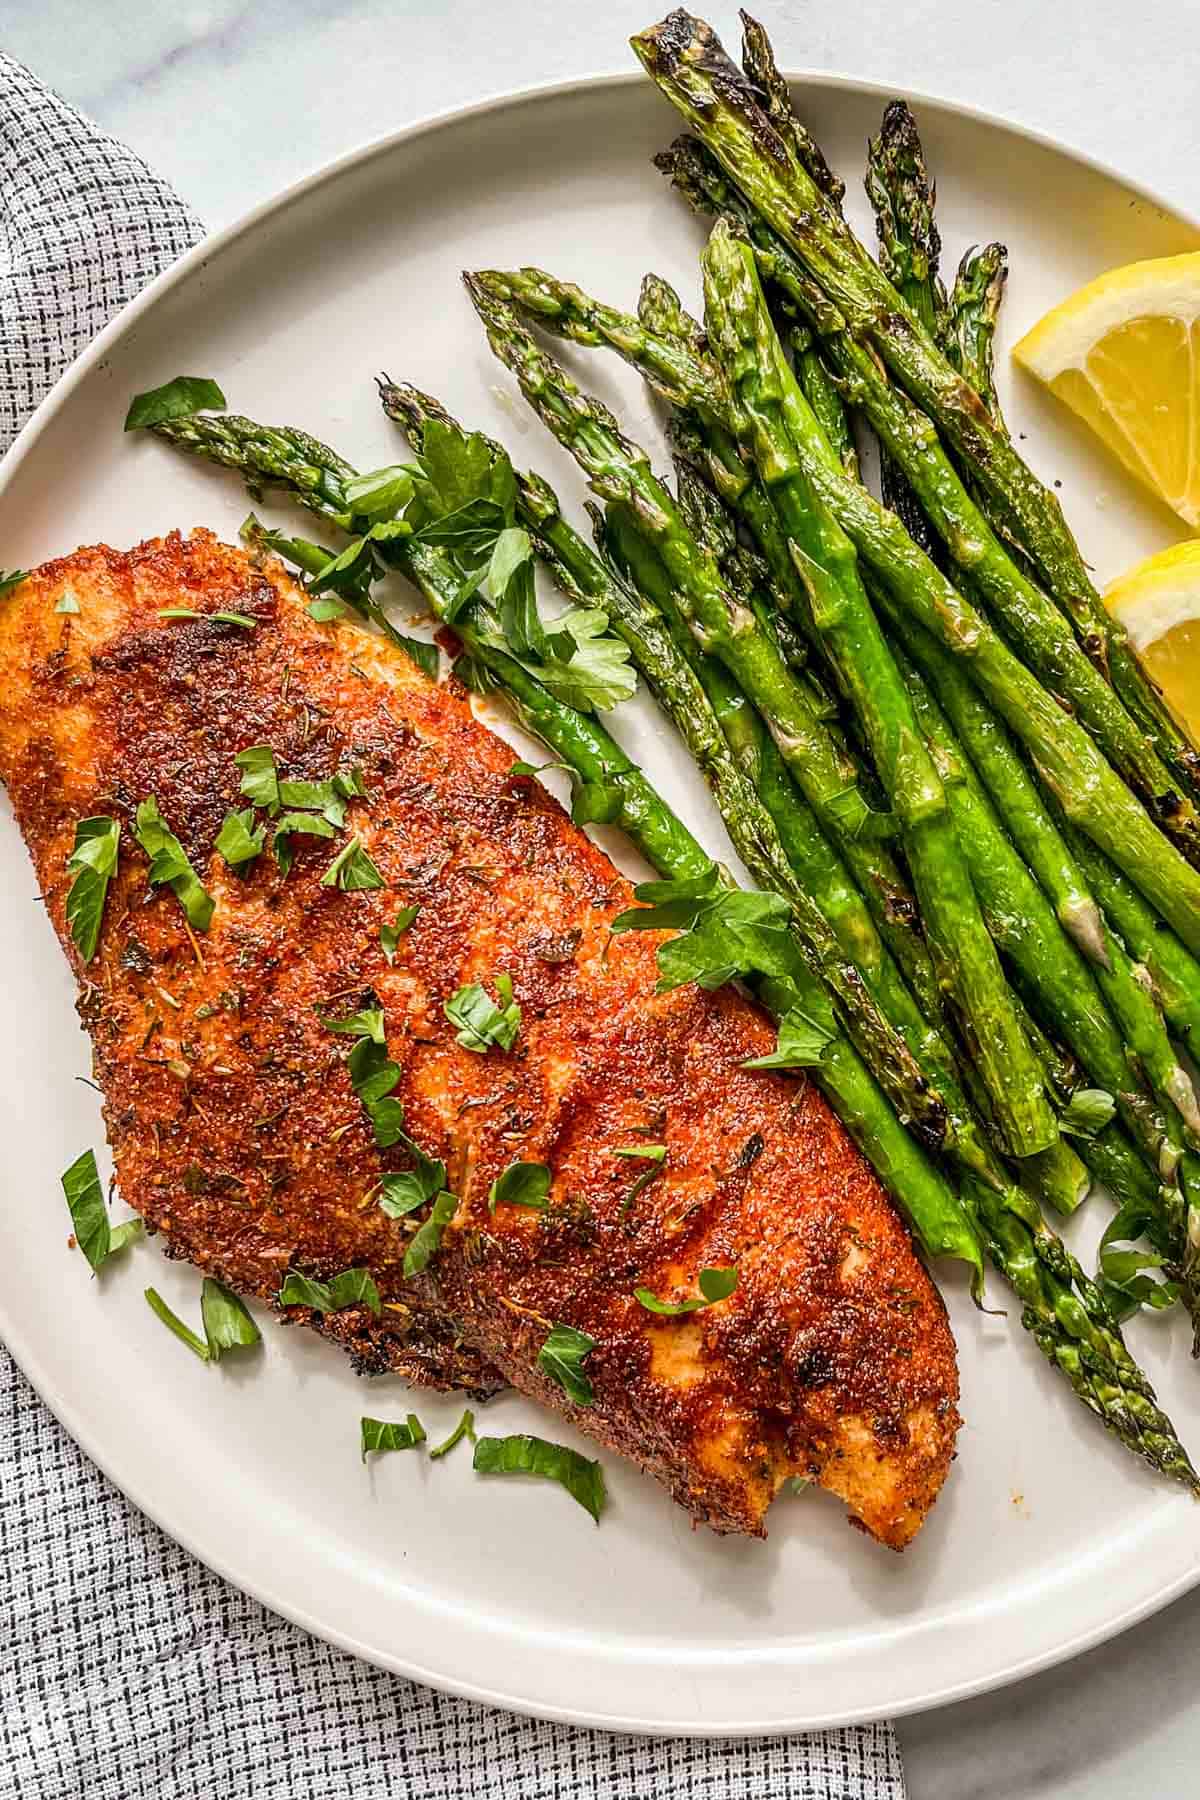 Grilled red snapper with asparagus.